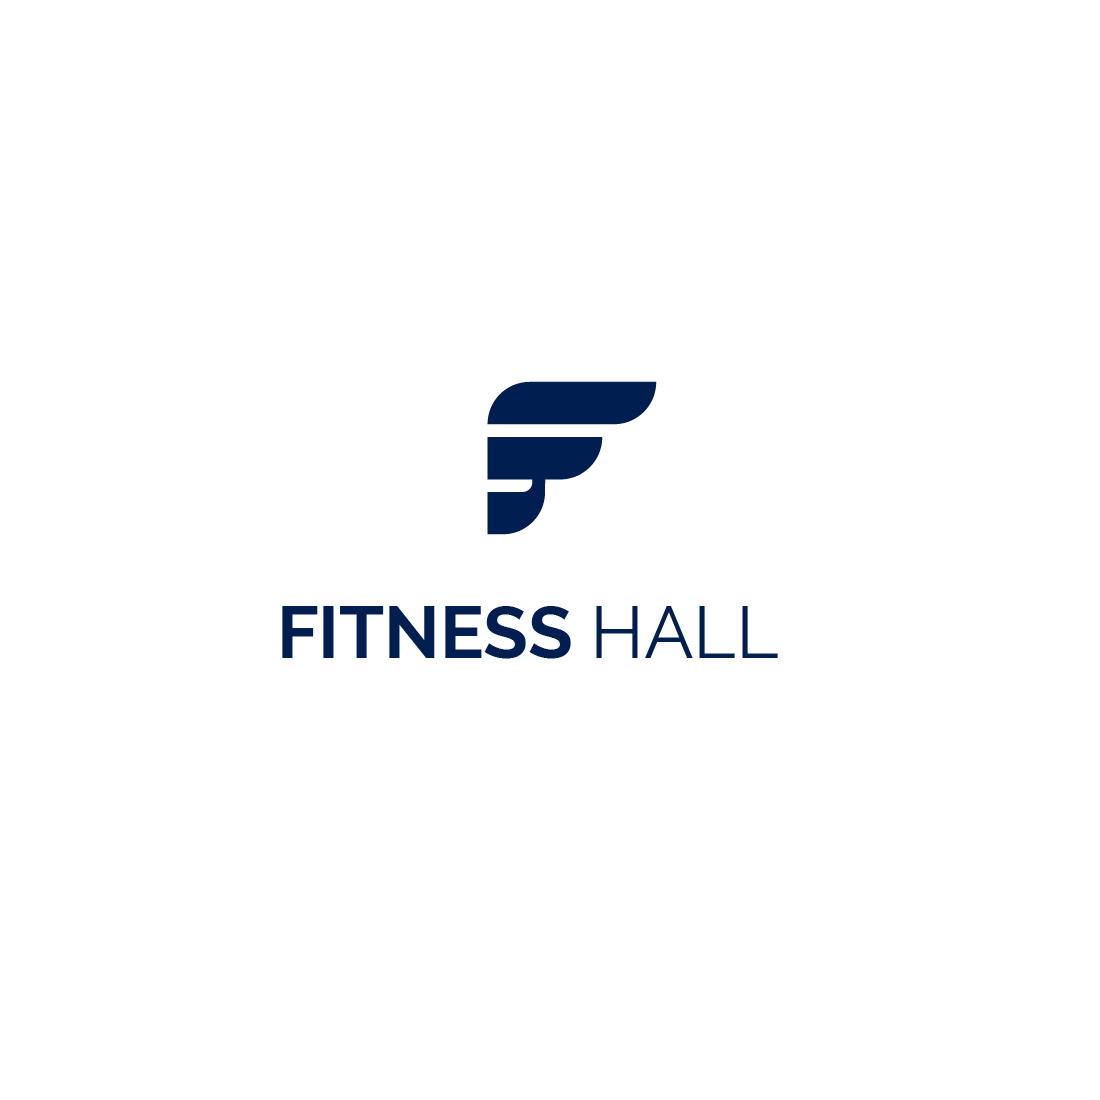 Fitness Logo cover image.